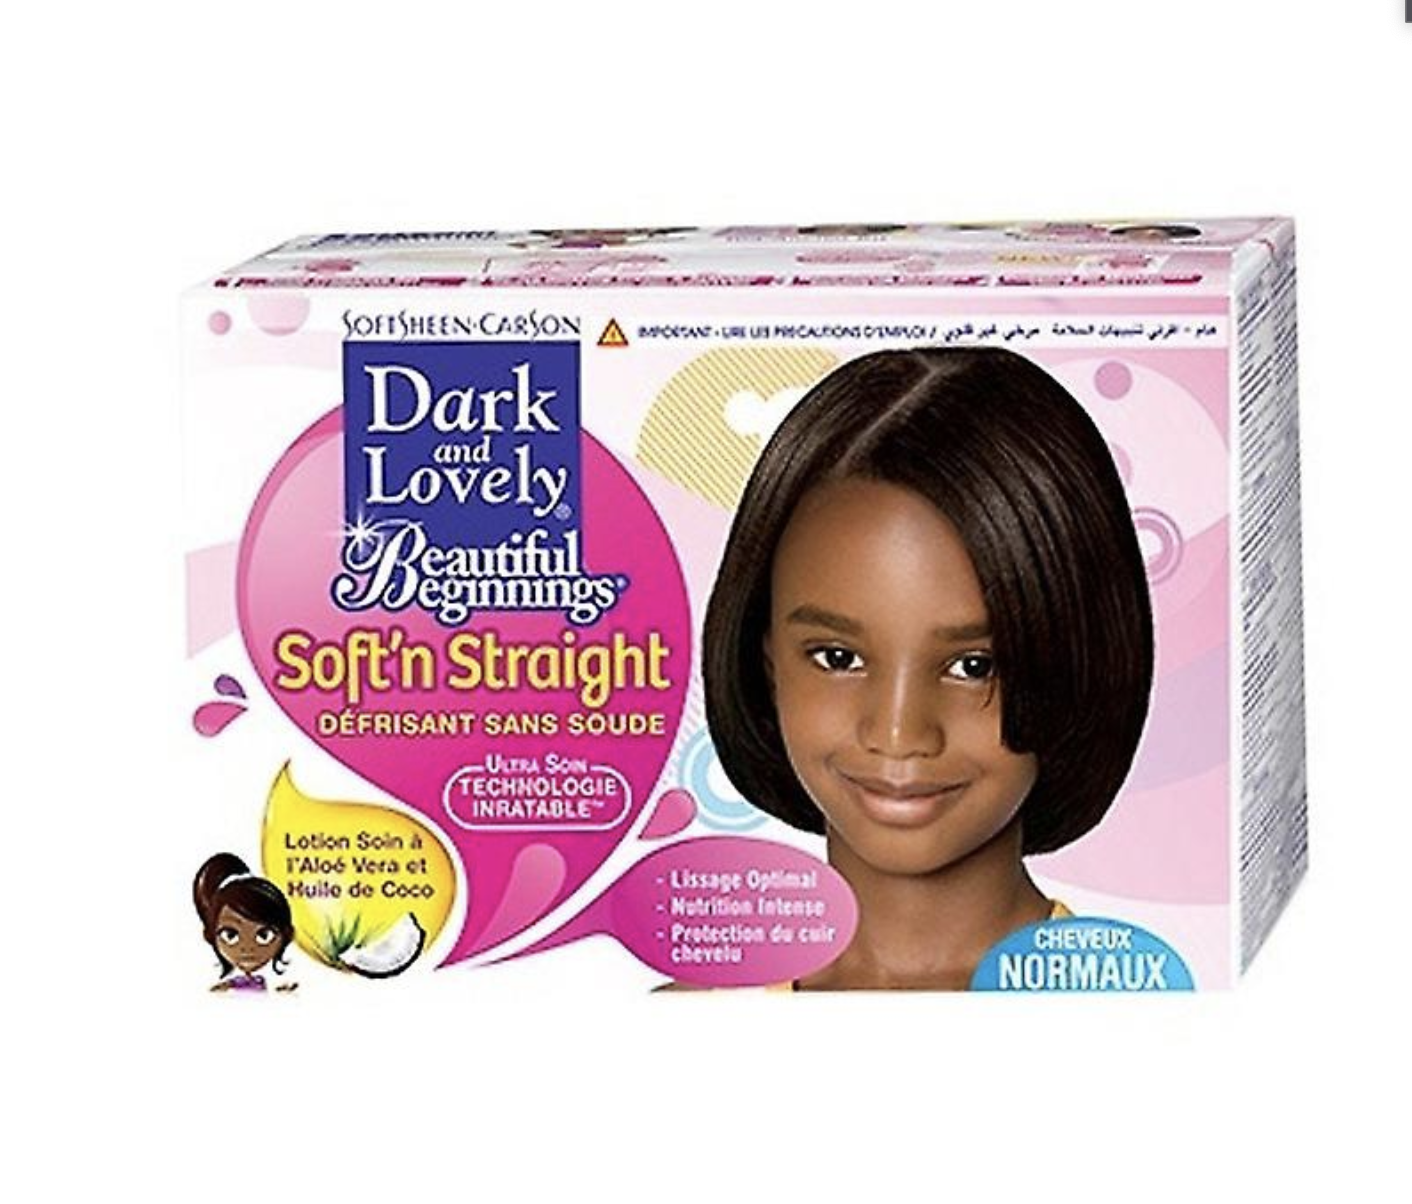 Do The Black Models On Relaxer Boxes Have Natural Hair?